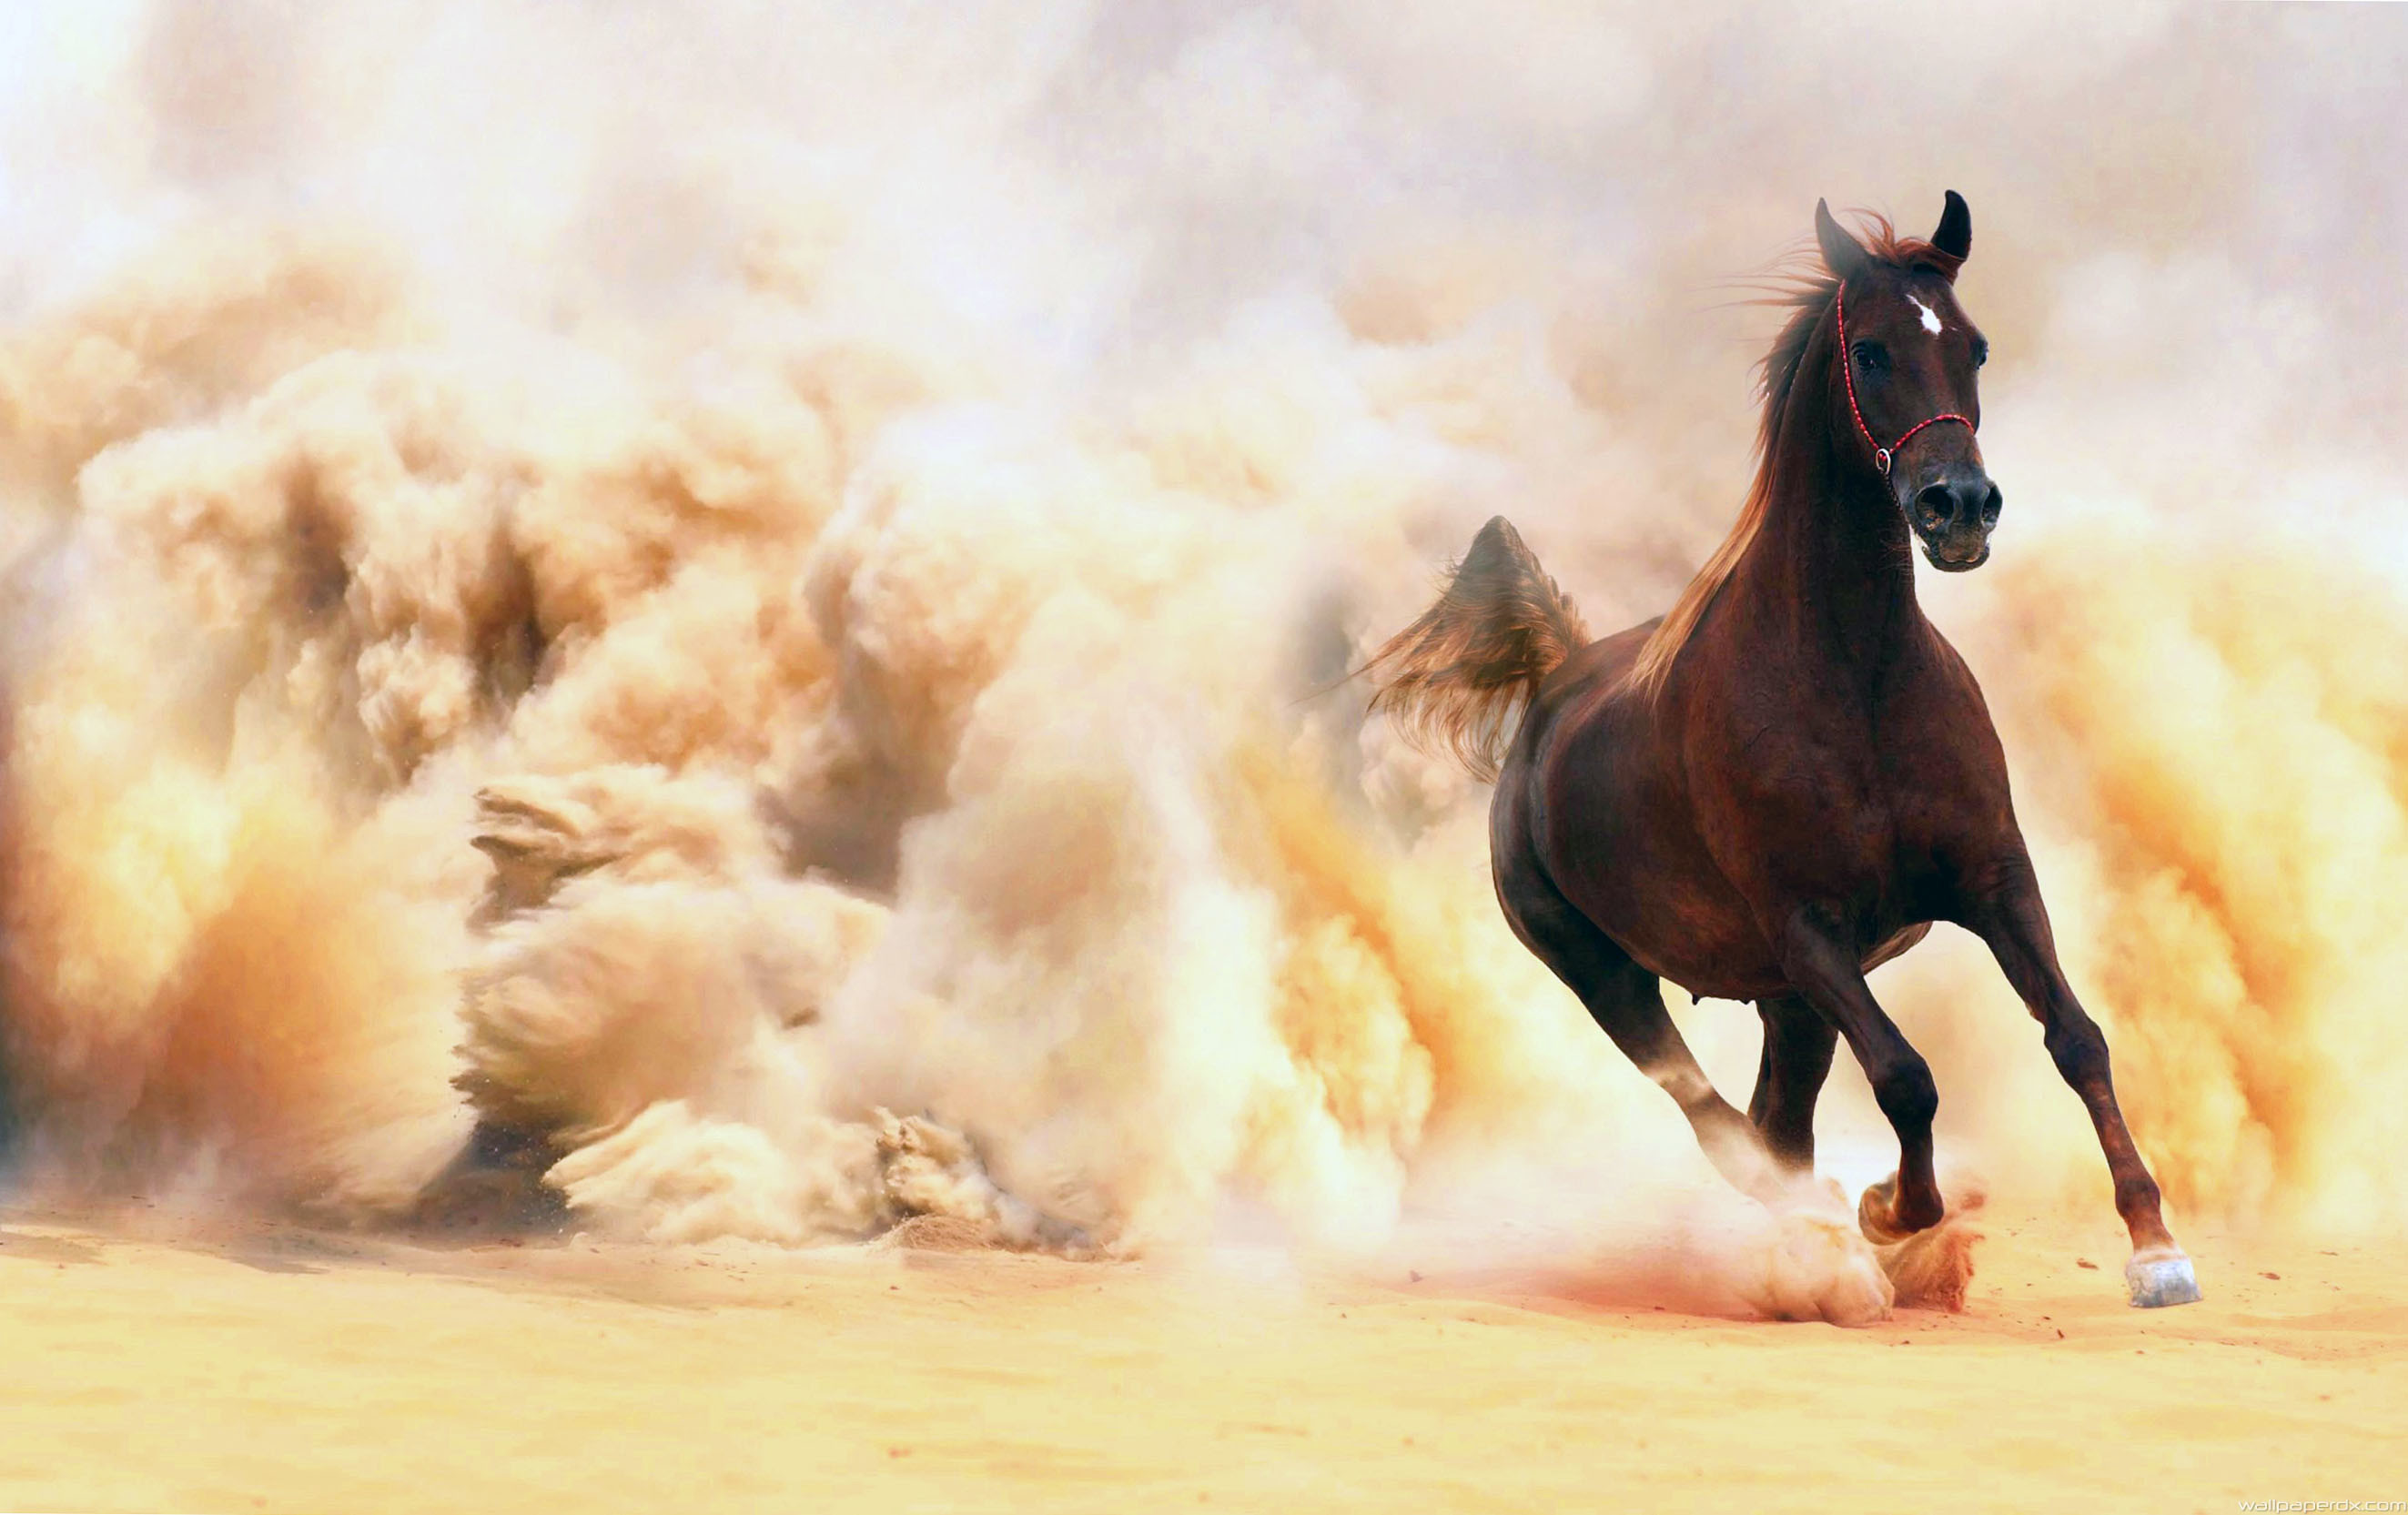 Image: Horse, galloping, dust, sand